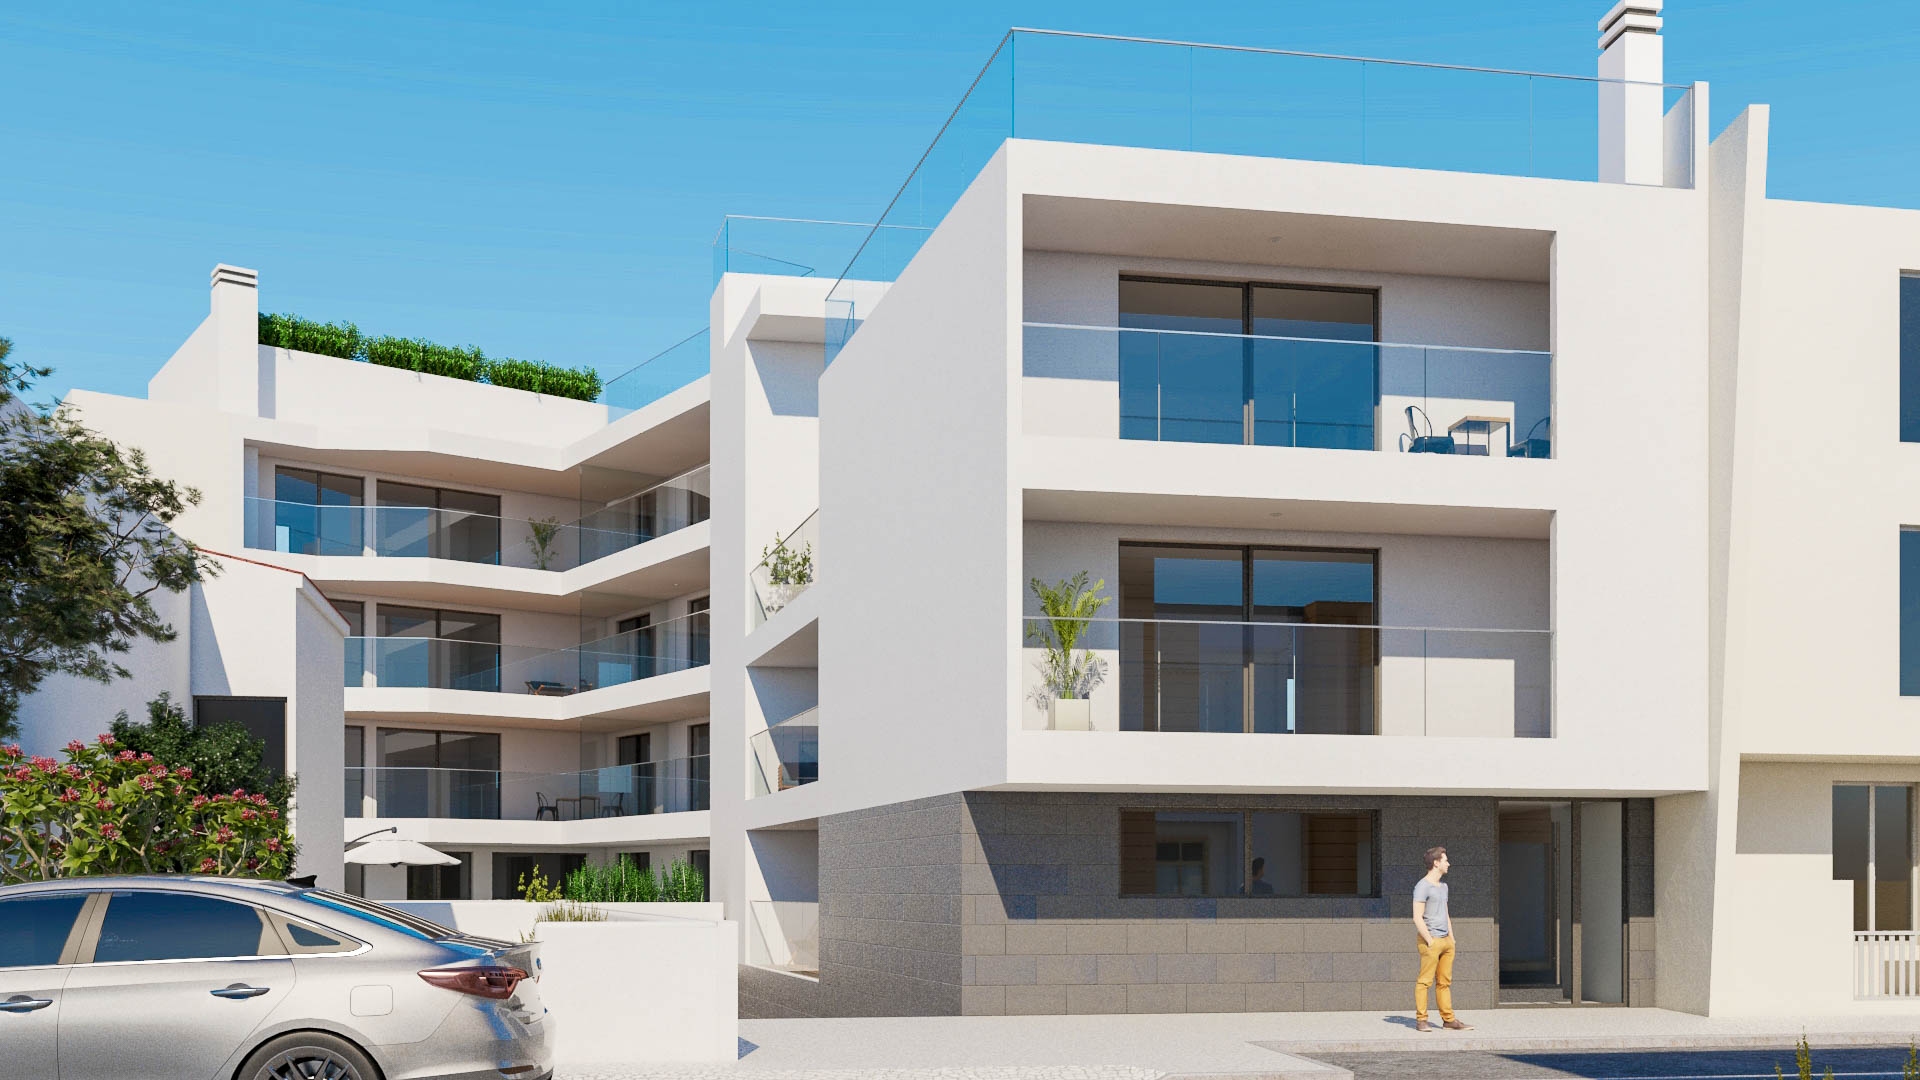 2 Bedroom Apartment with Rooftop Pool in Olhos d’Água, Albufeira | VM1800 2-bedroom apartment with stunning sea views from the roof top swimming pool is set in a small 14 apartment condominium with easy access to local restaurants, cafés and shops in Olhos d’Água